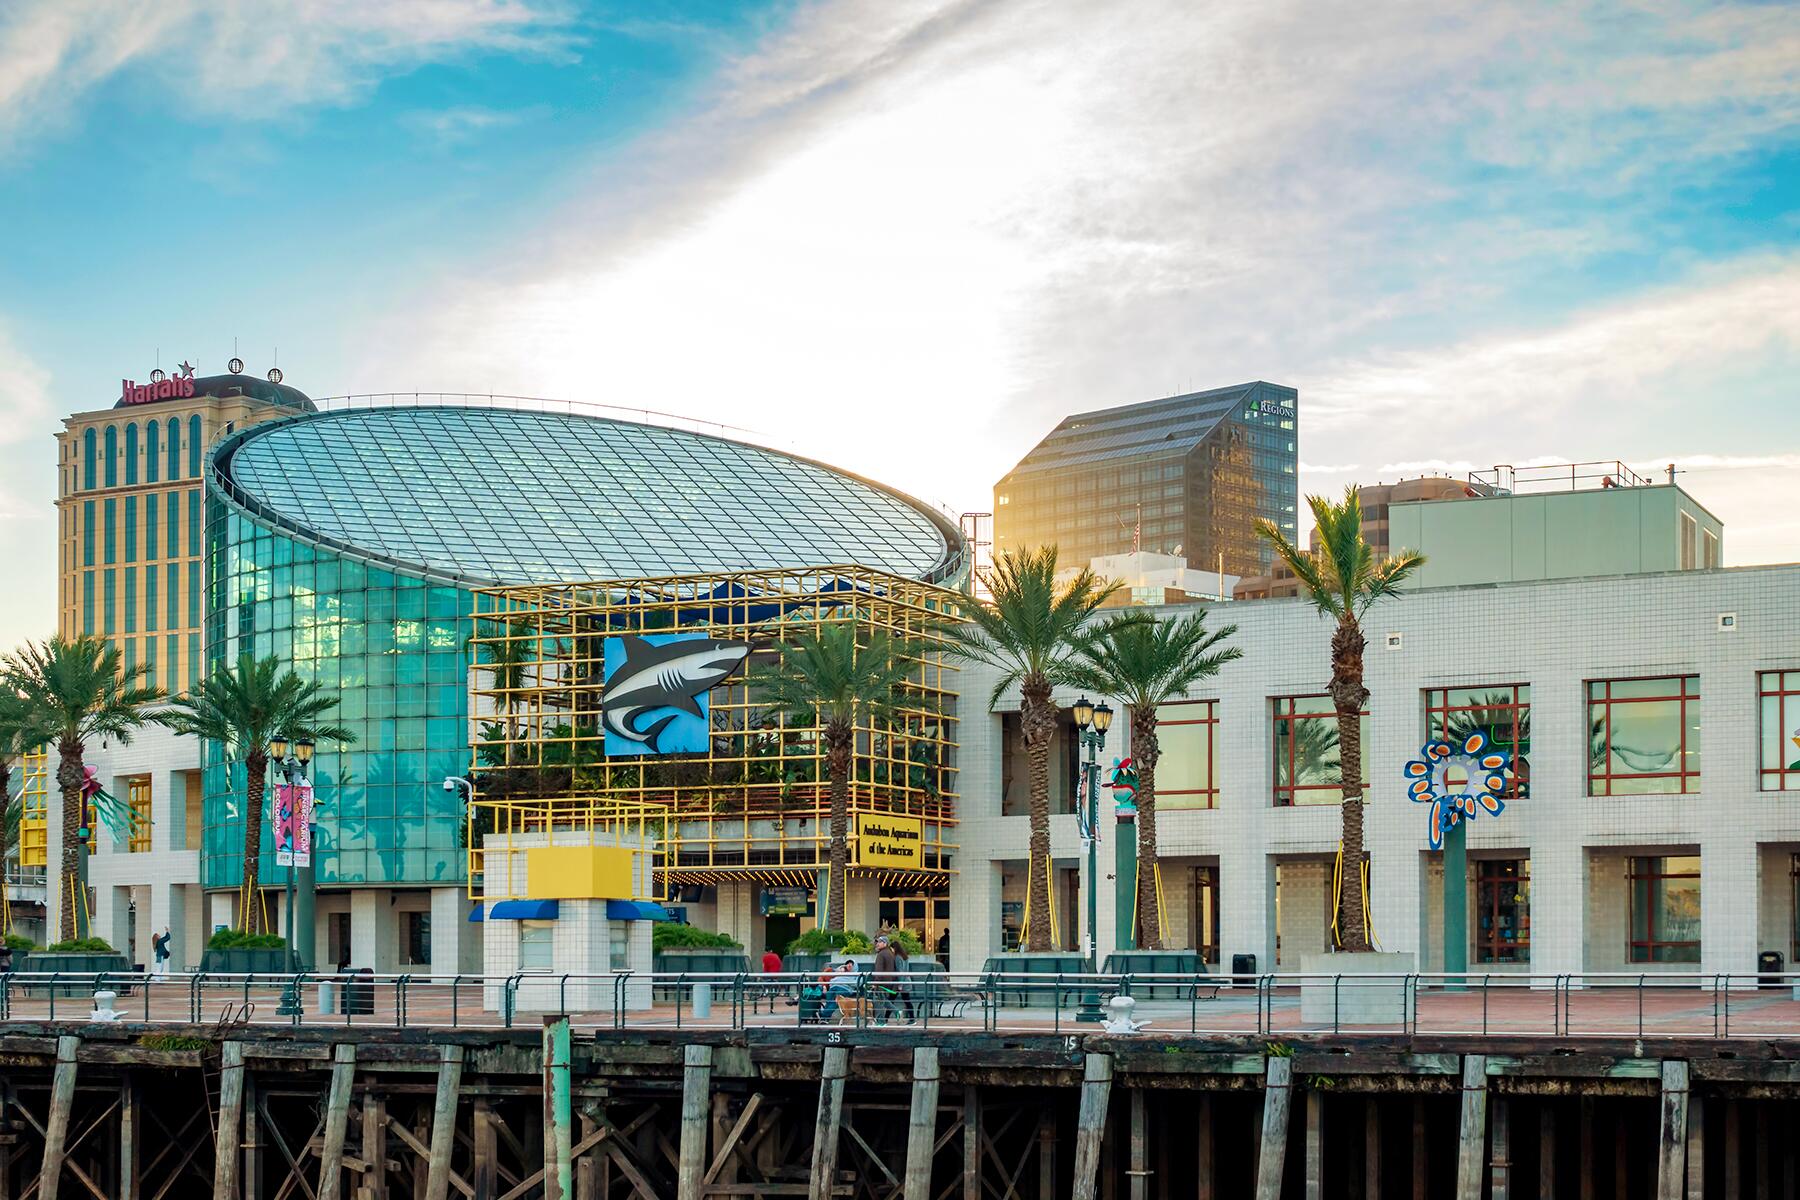 <a href='https://www.fodors.com/world/north-america/usa/louisiana/new-orleans/experiences/news/photos/ultimate-things-to-do-in-new-orleans#'>From &quot;25 Ultimate Things to Do in New Orleans: Admire the Aquarium of the Americas&quot;</a>